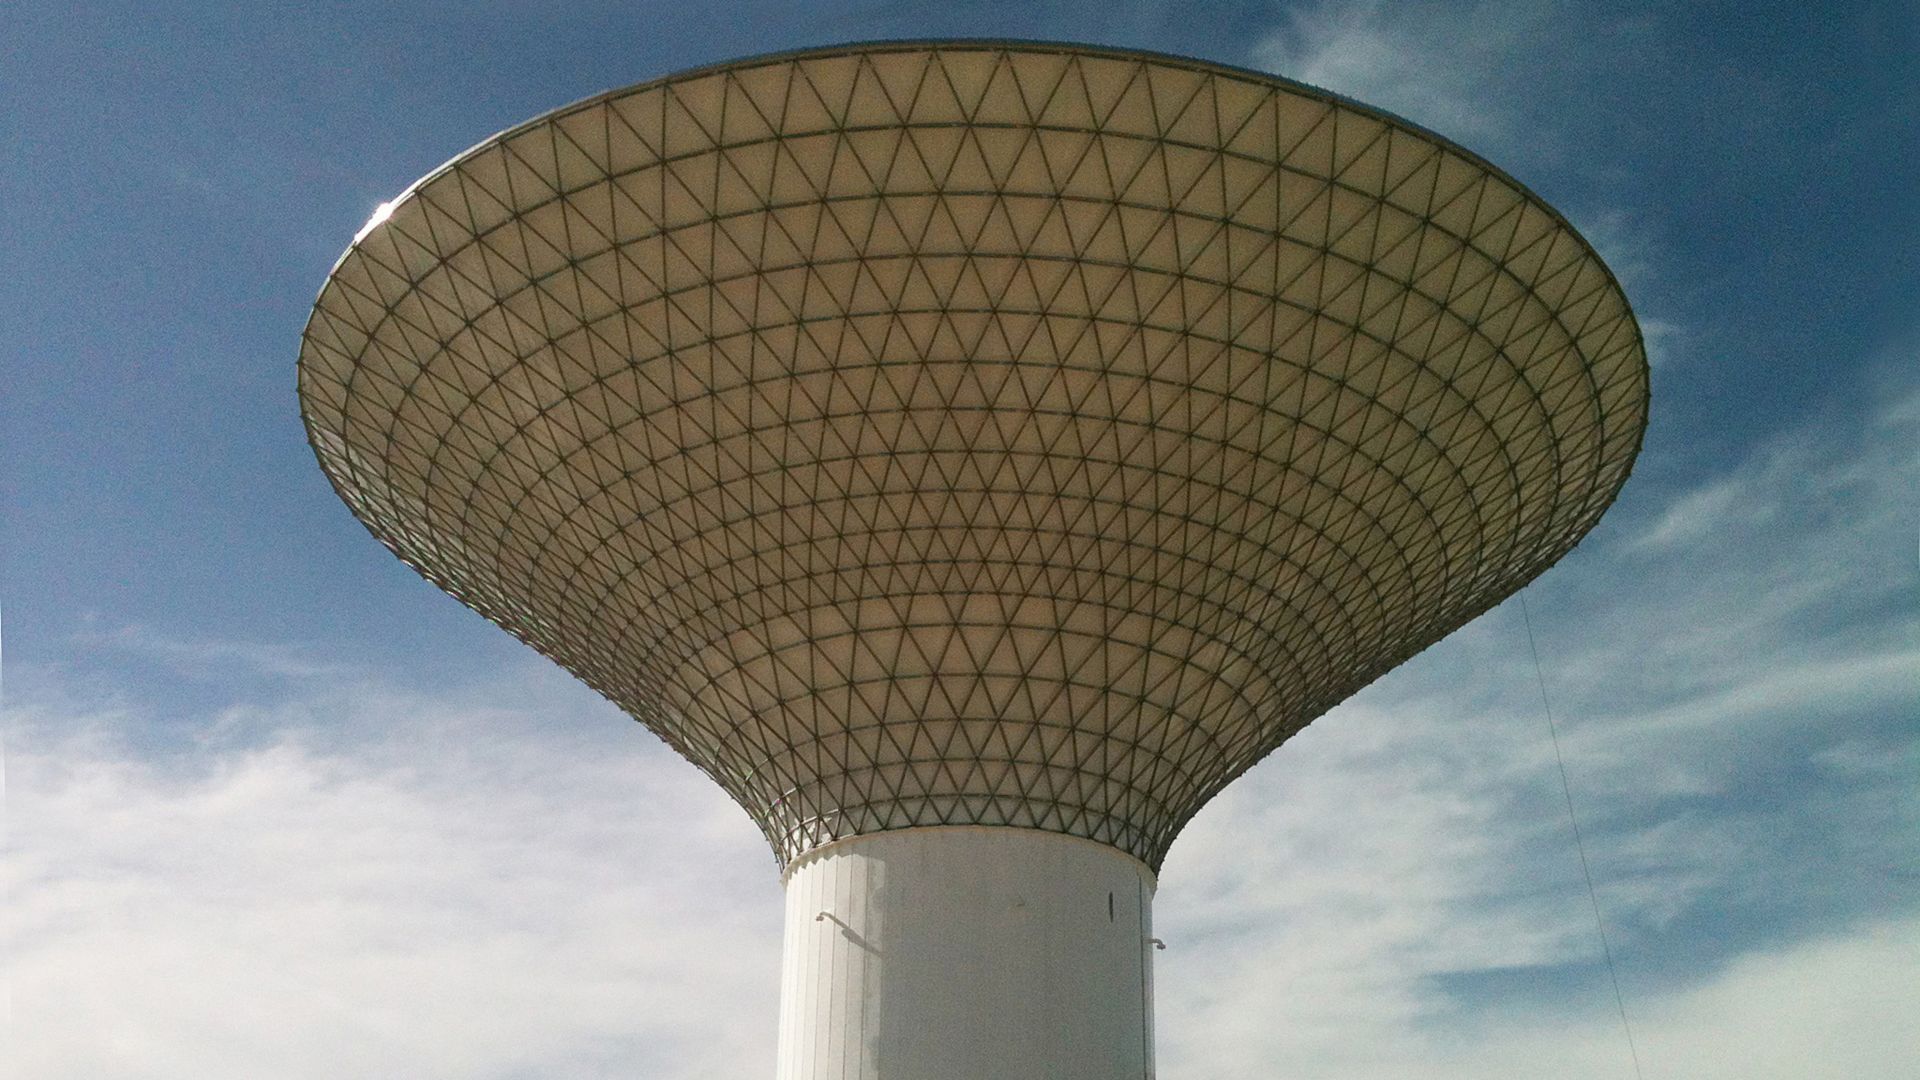 Sikaplan waterproofing membrane on water tower construction in Mexico